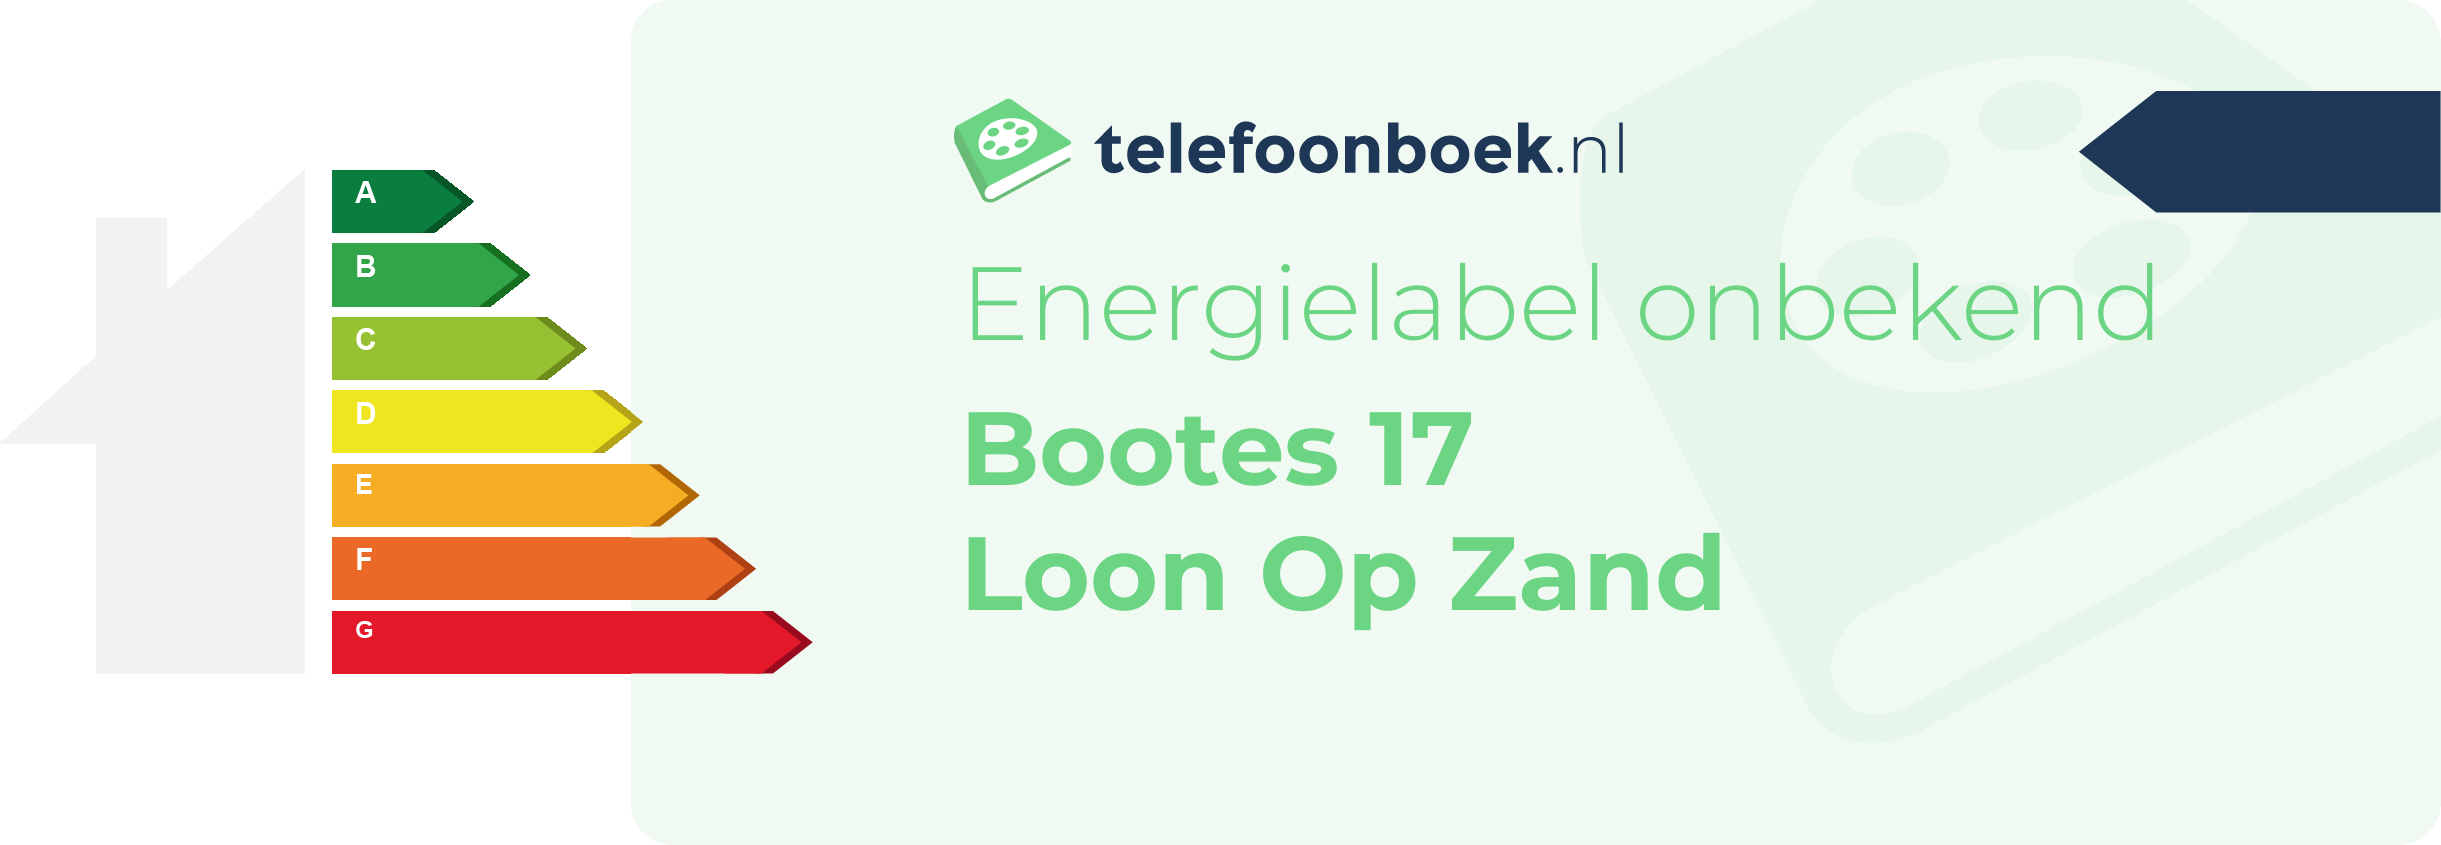 Energielabel Bootes 17 Loon Op Zand